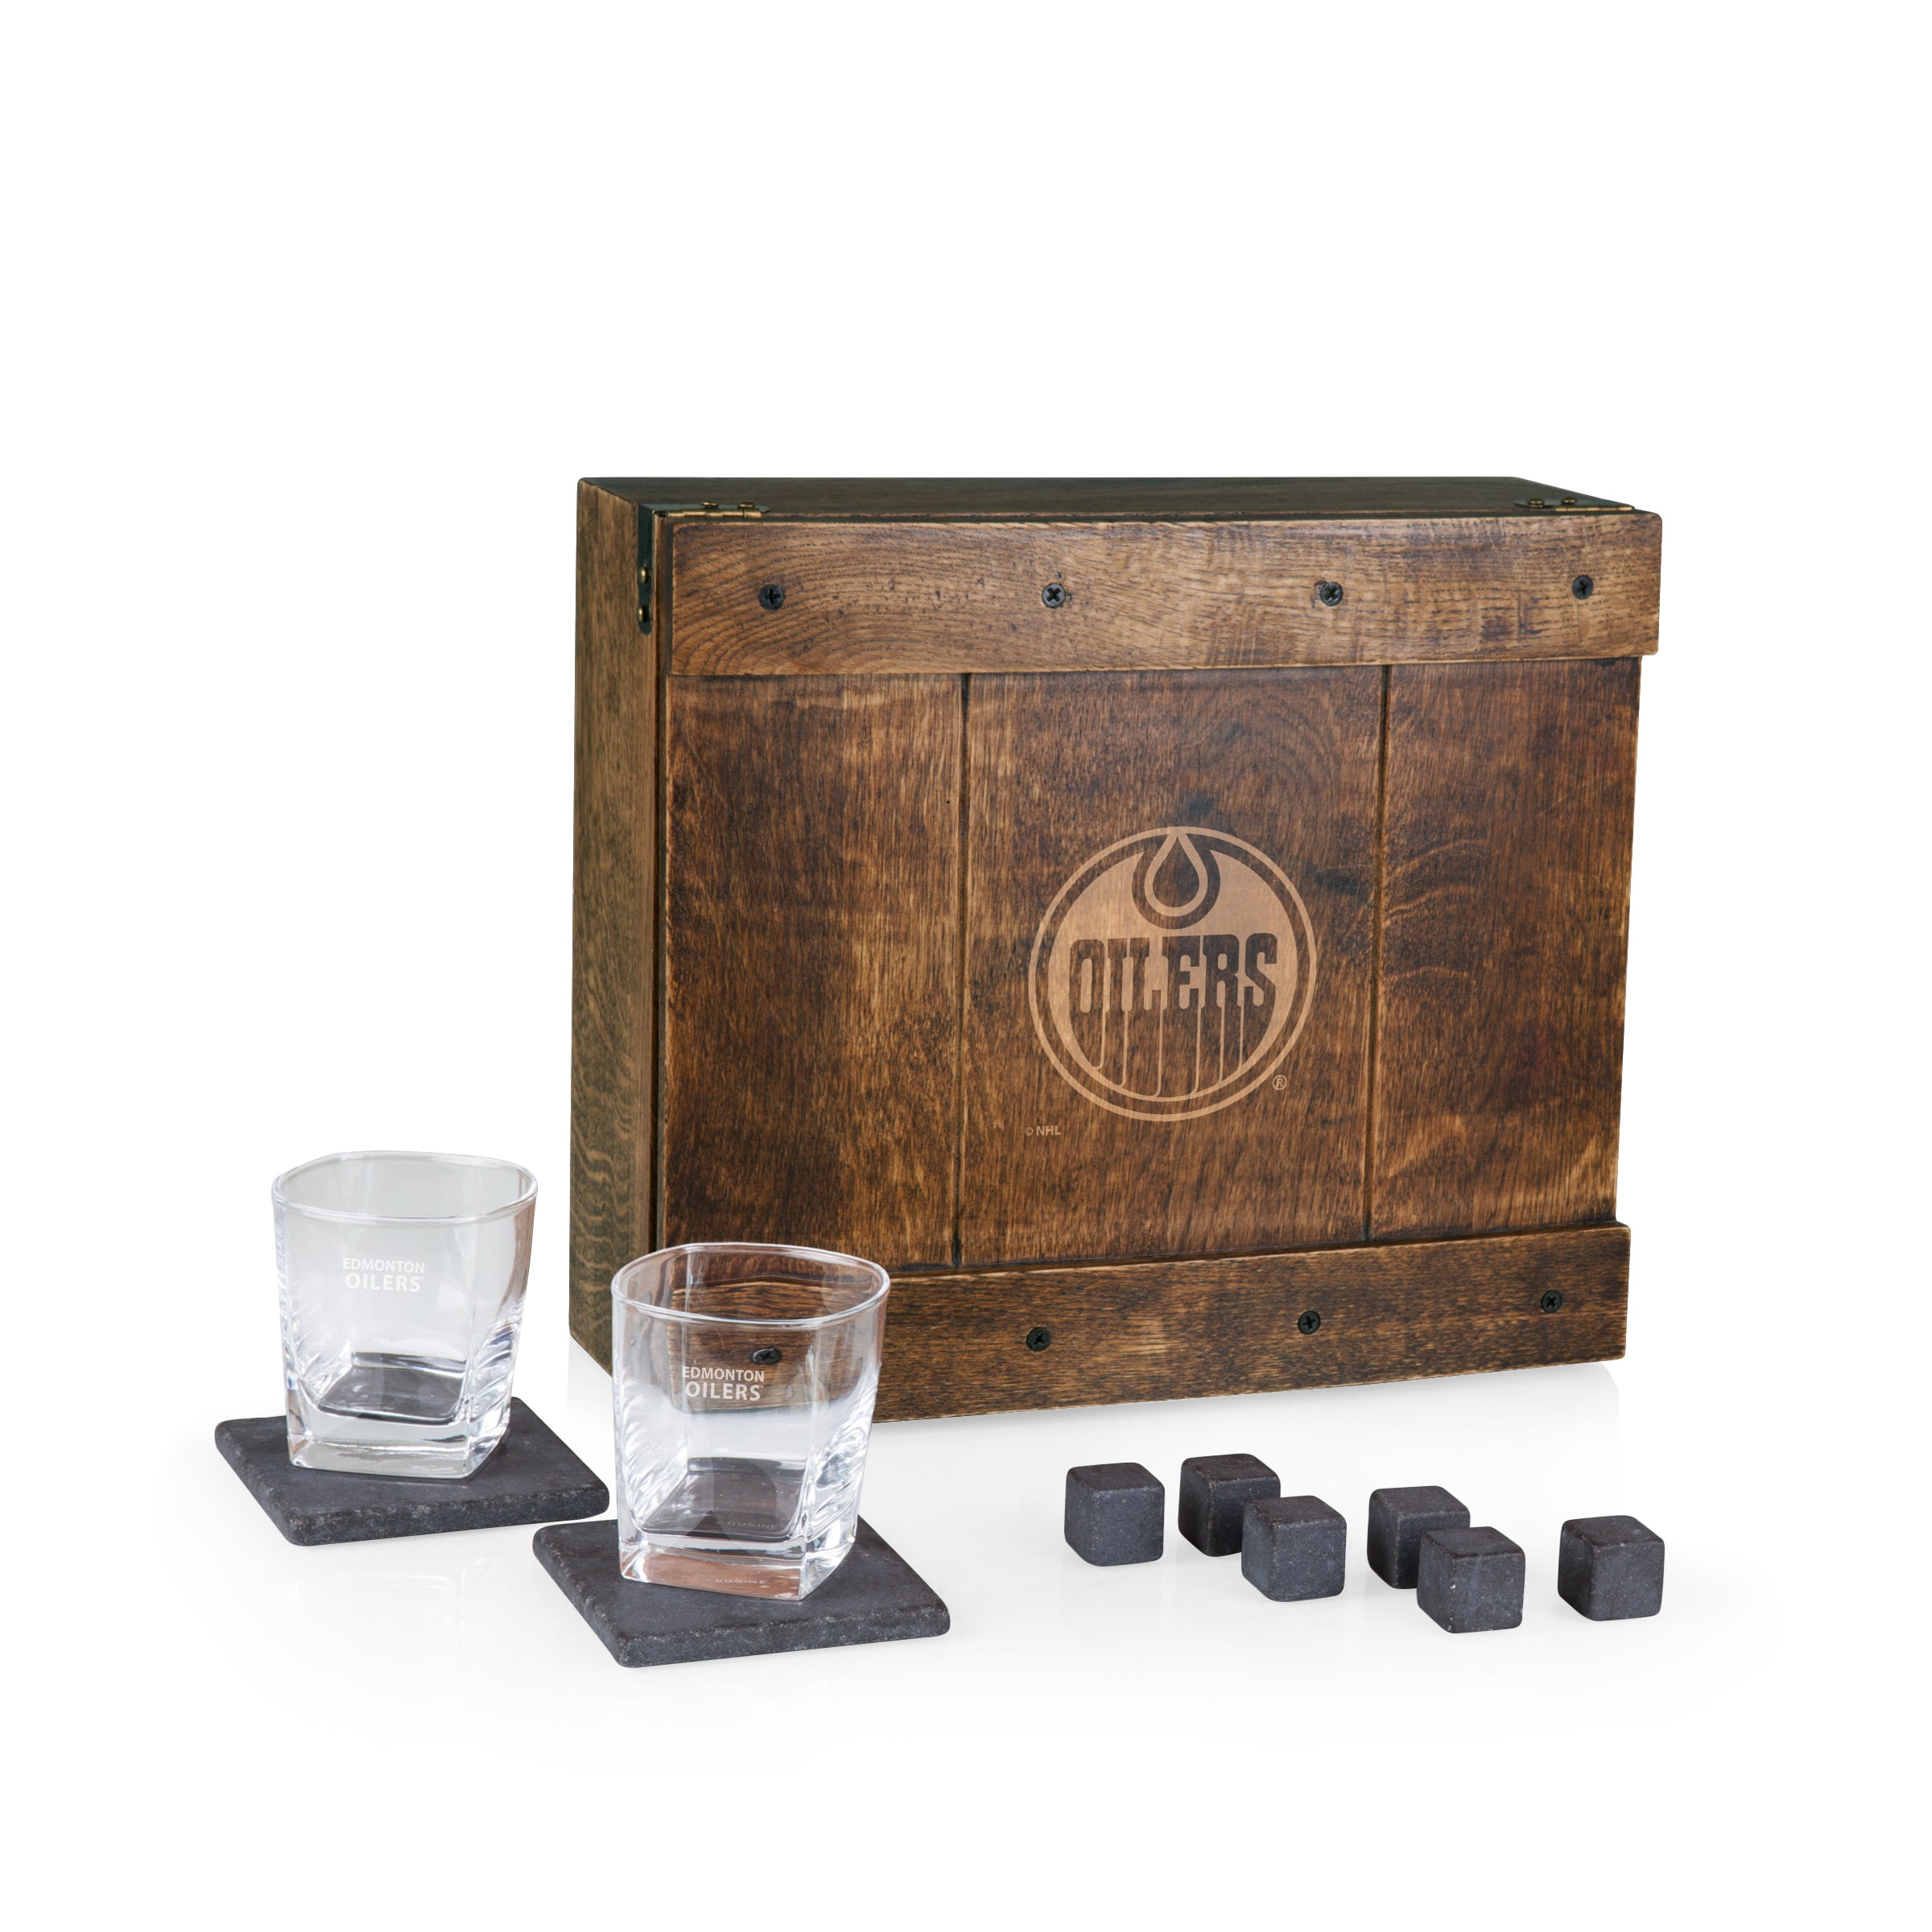 UNIQUE GIFT JoyJolt Poker Whiskey Glass Gift Set KING OF DIAMONDS Whiskey  Glass with Playing Cards, Whiskey Stones, Pouch and Tongs 